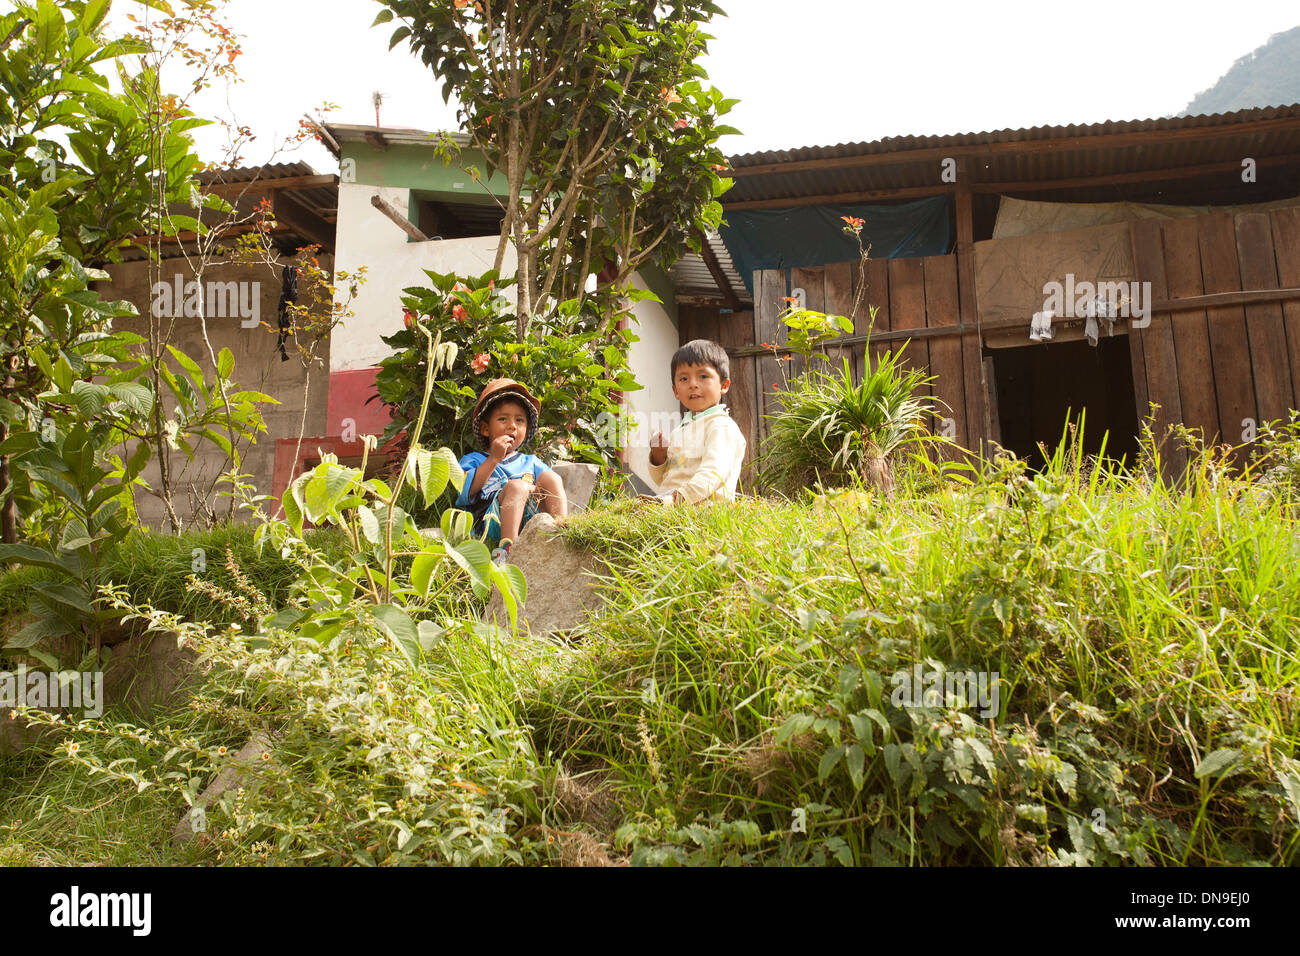 Two Peruvian boys sitting in the grass outside their house Stock Photo